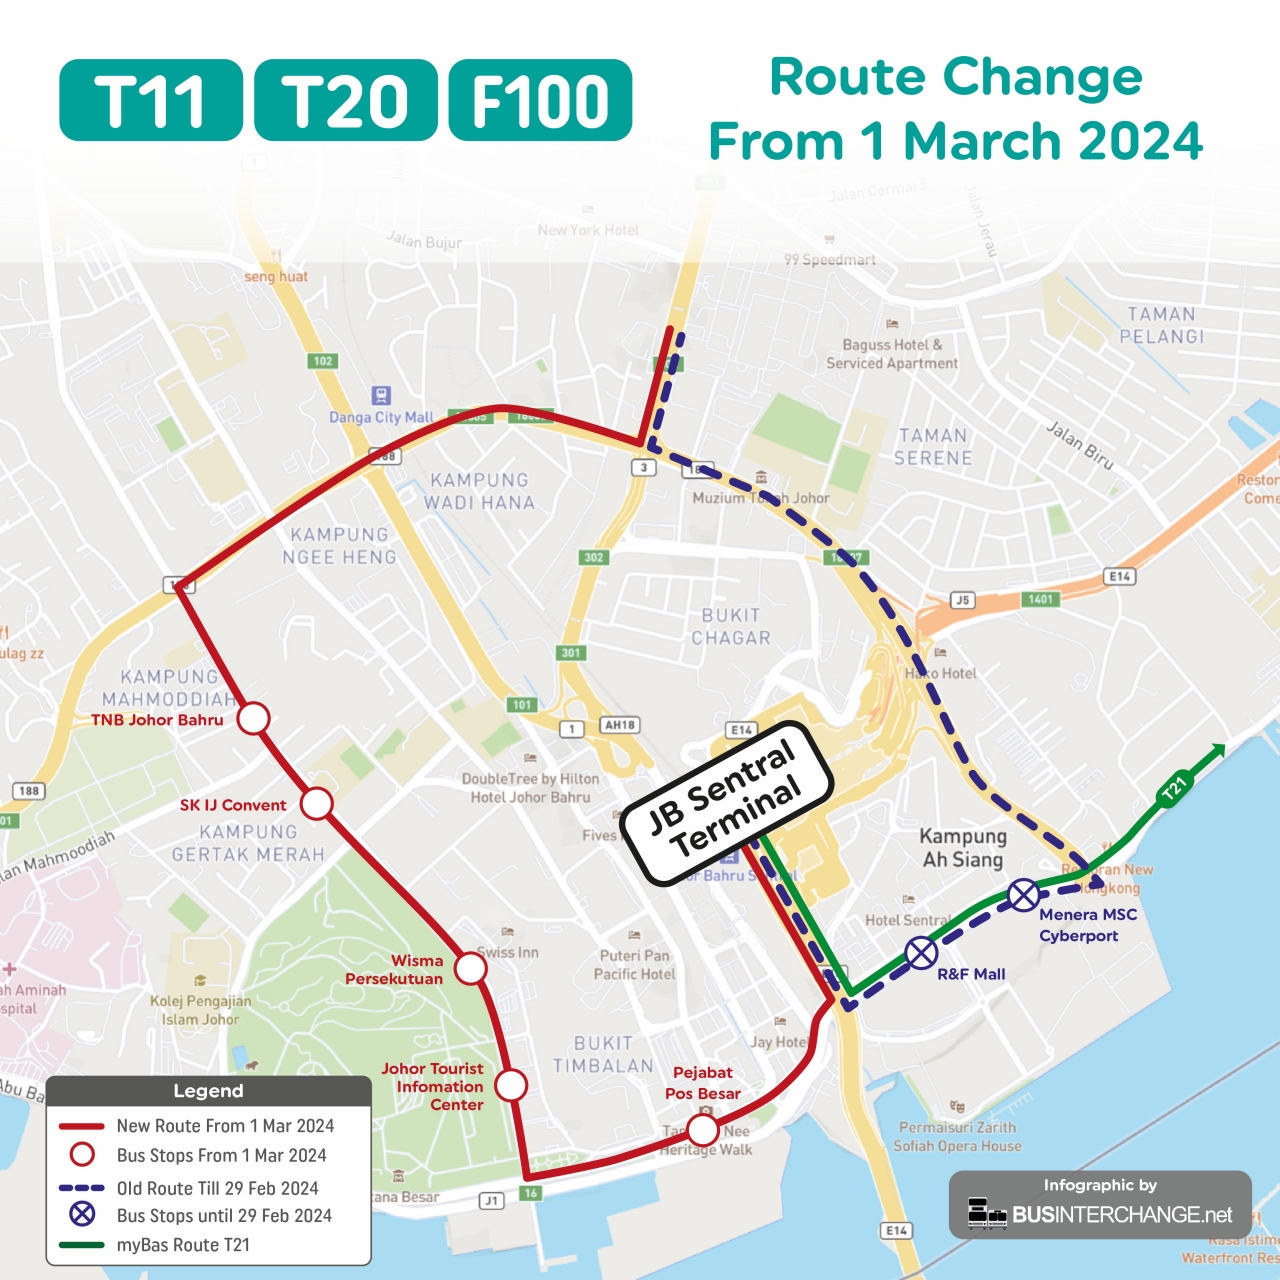 myBas Johor Bahru Route T11, T20 and F100 change its routing at Johor Bahru City Centre from 1 March 2024